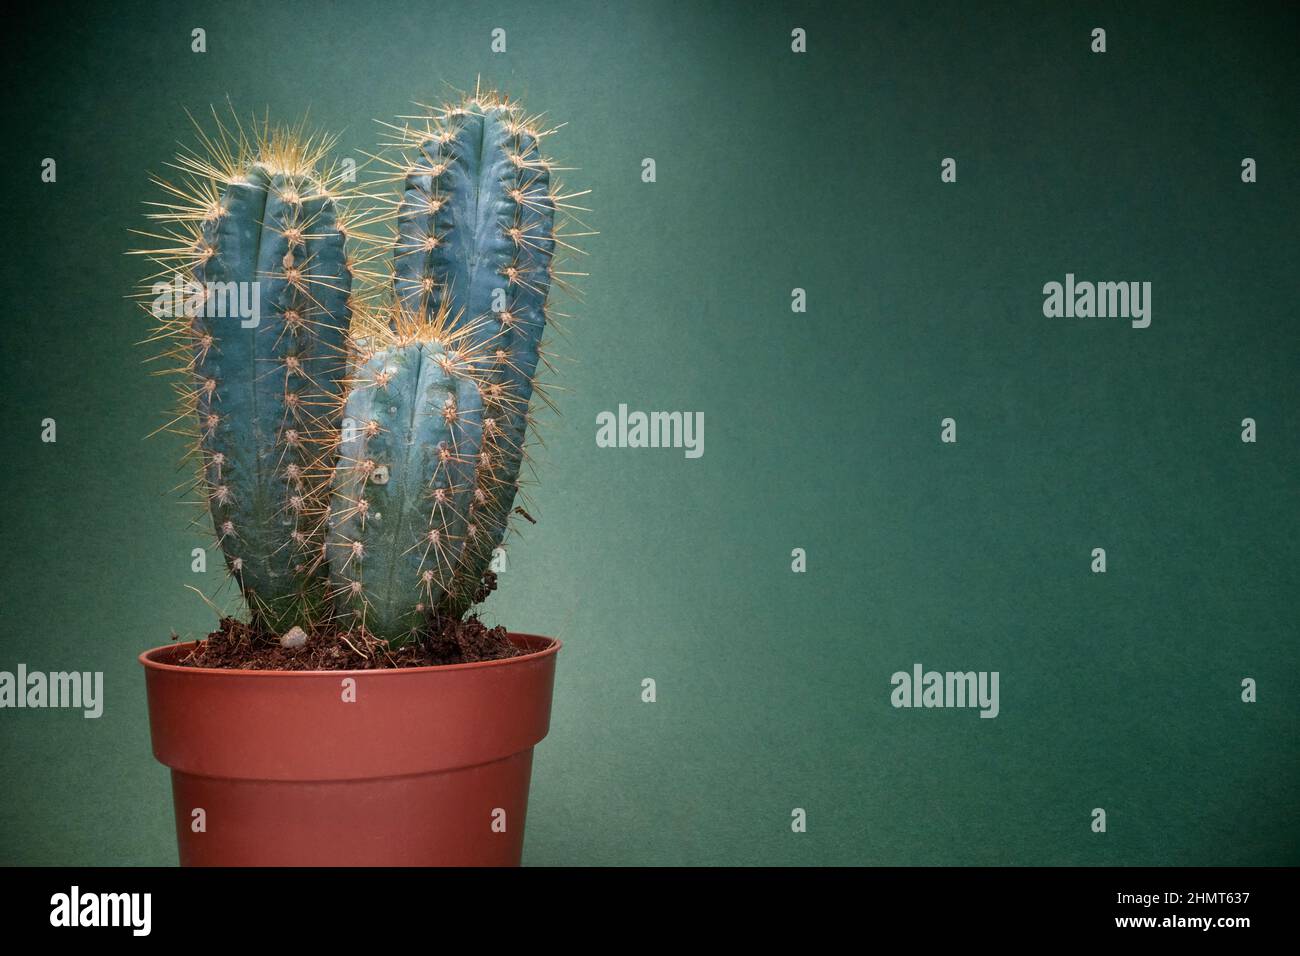 Cactus in pot.spines on cactus on green background. Stock Photo